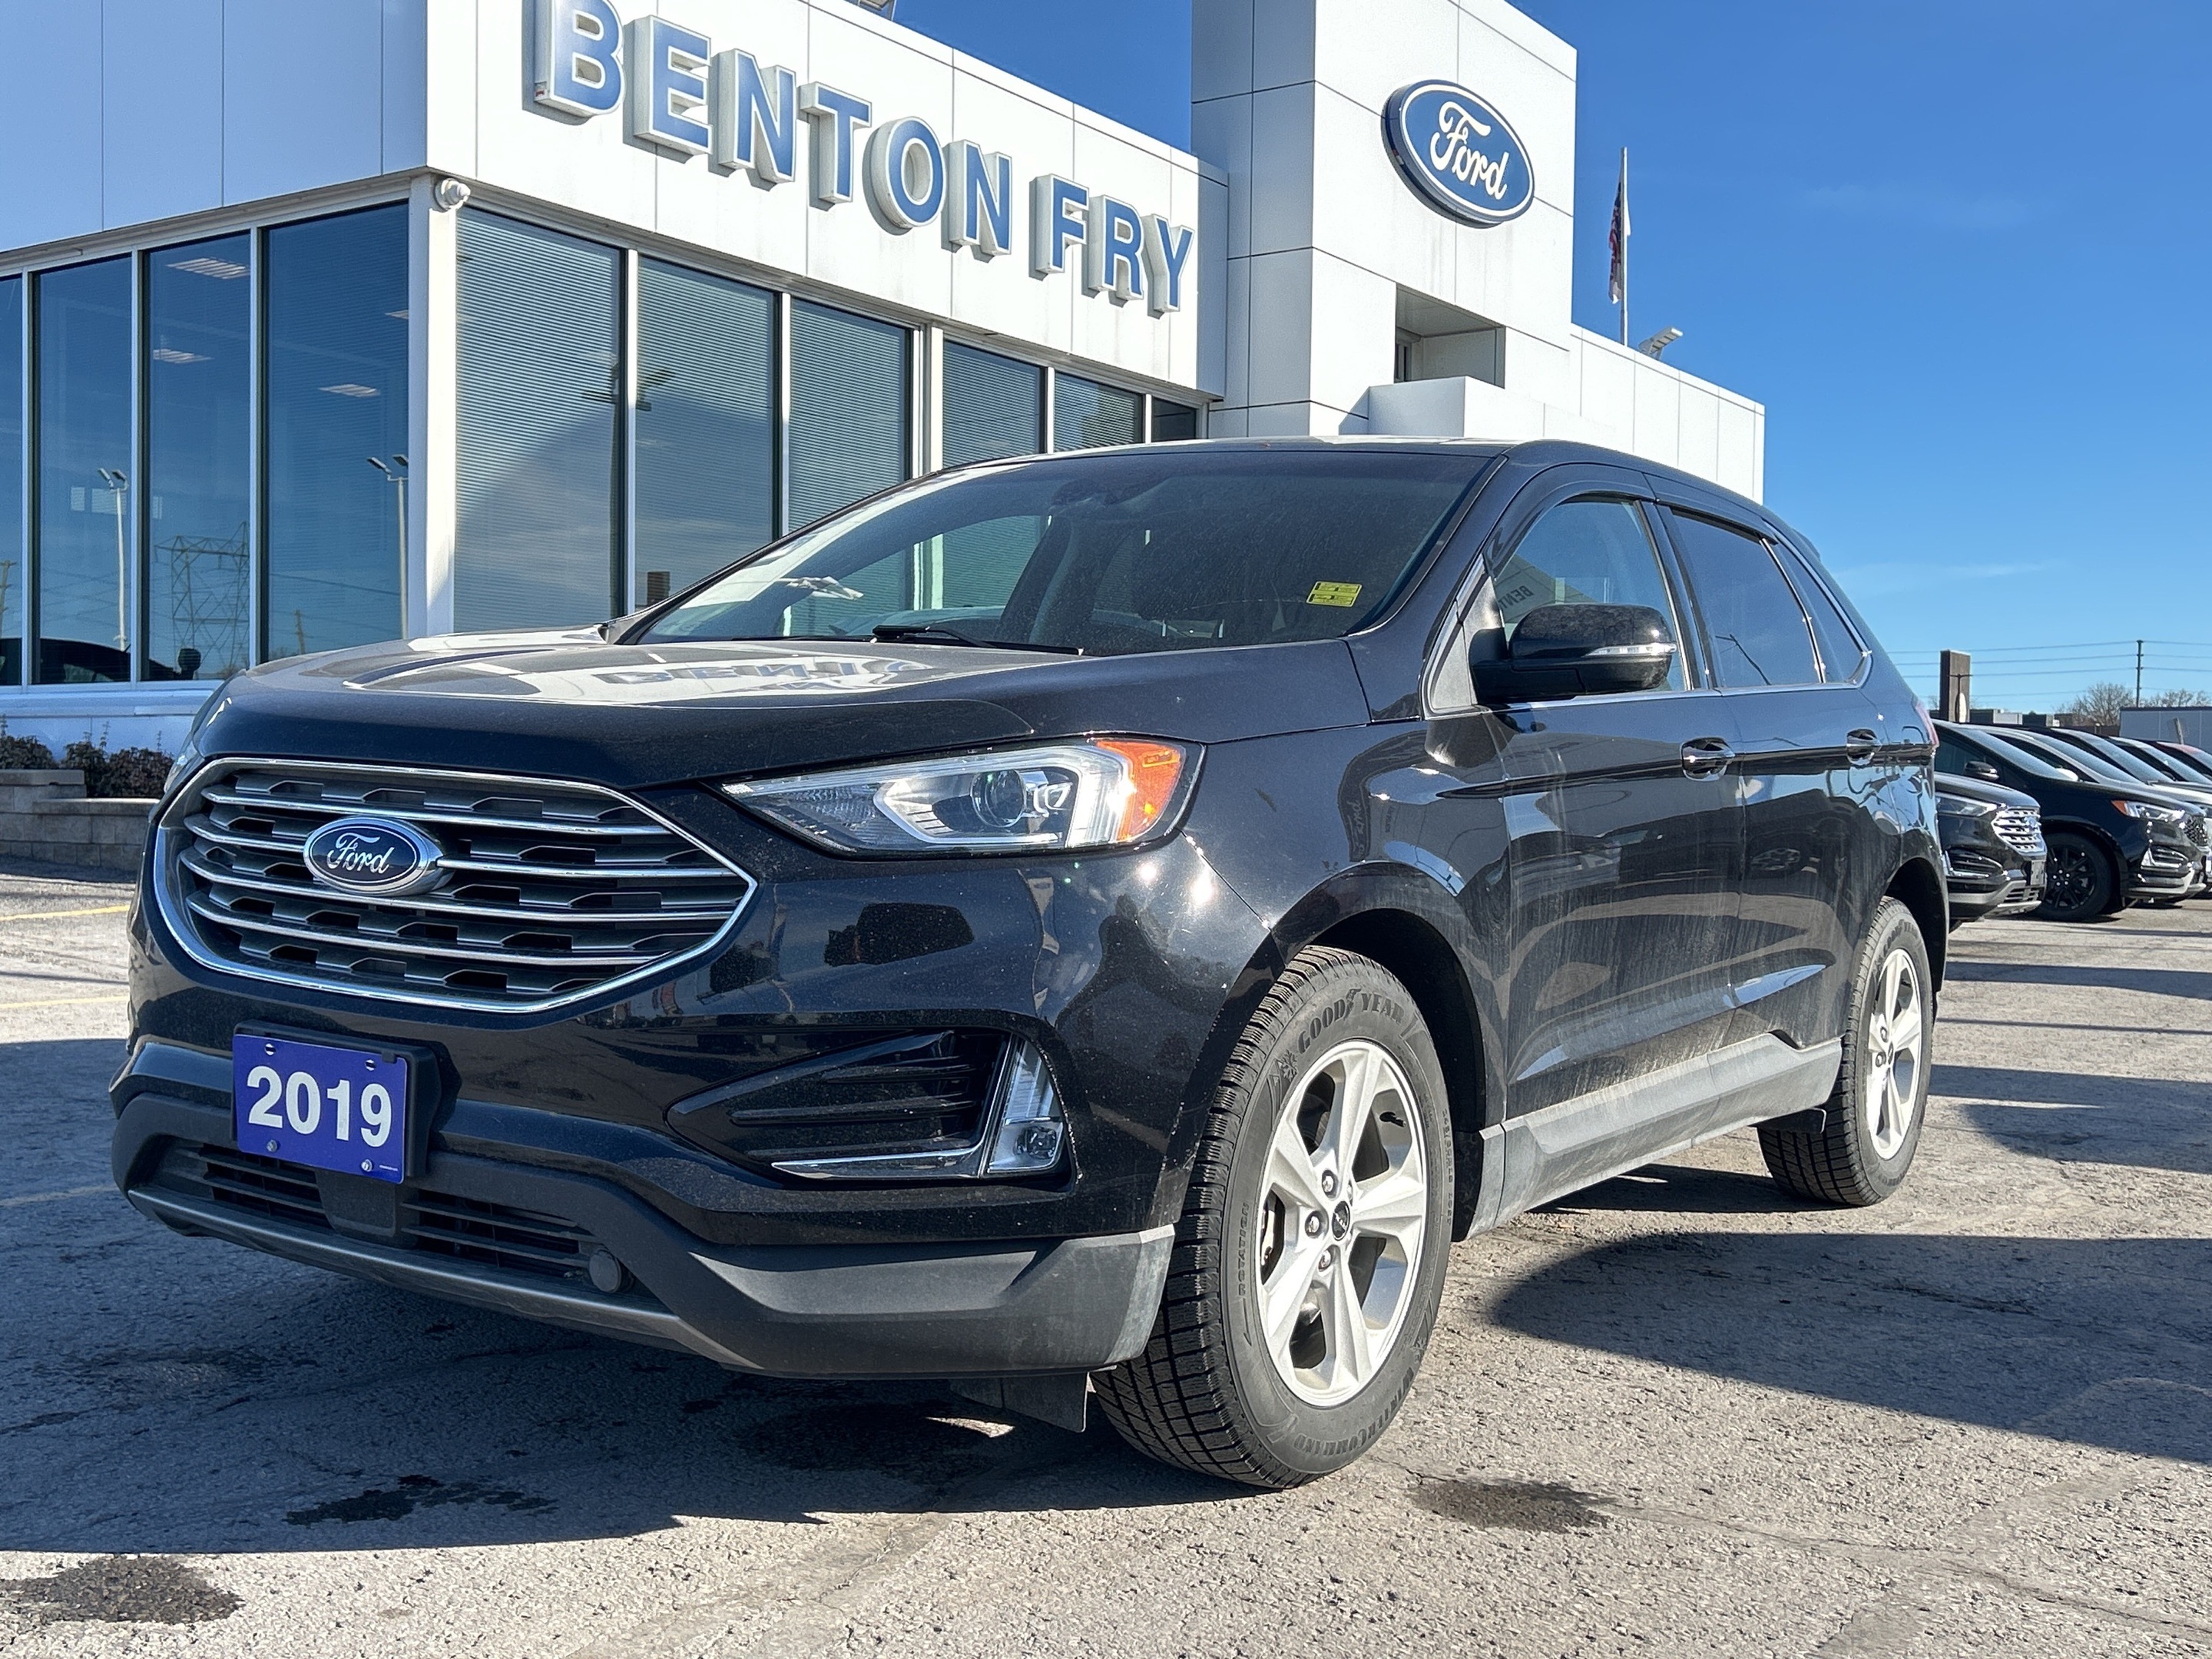 2019 Ford Edge SEL - 2.0L AWD PANO ROOF SYNC3 & CO PILOT & MUCH M